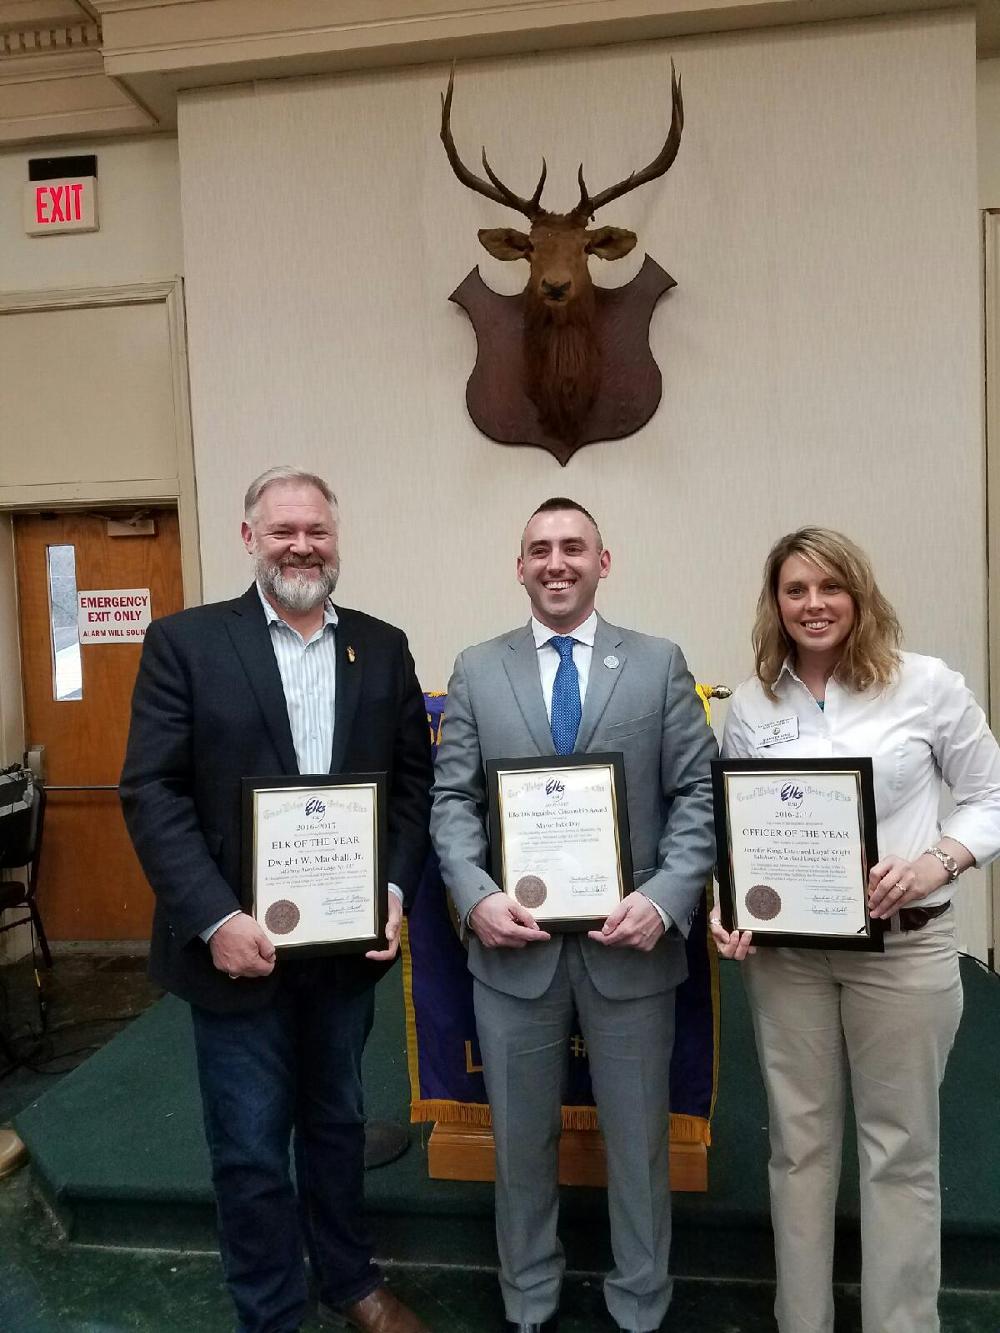 Our Award winners. Elk of the Year - Duke Marshall, Citizen of the Year - Mayor Jake Day, Officer of the Year - Jennifer King.